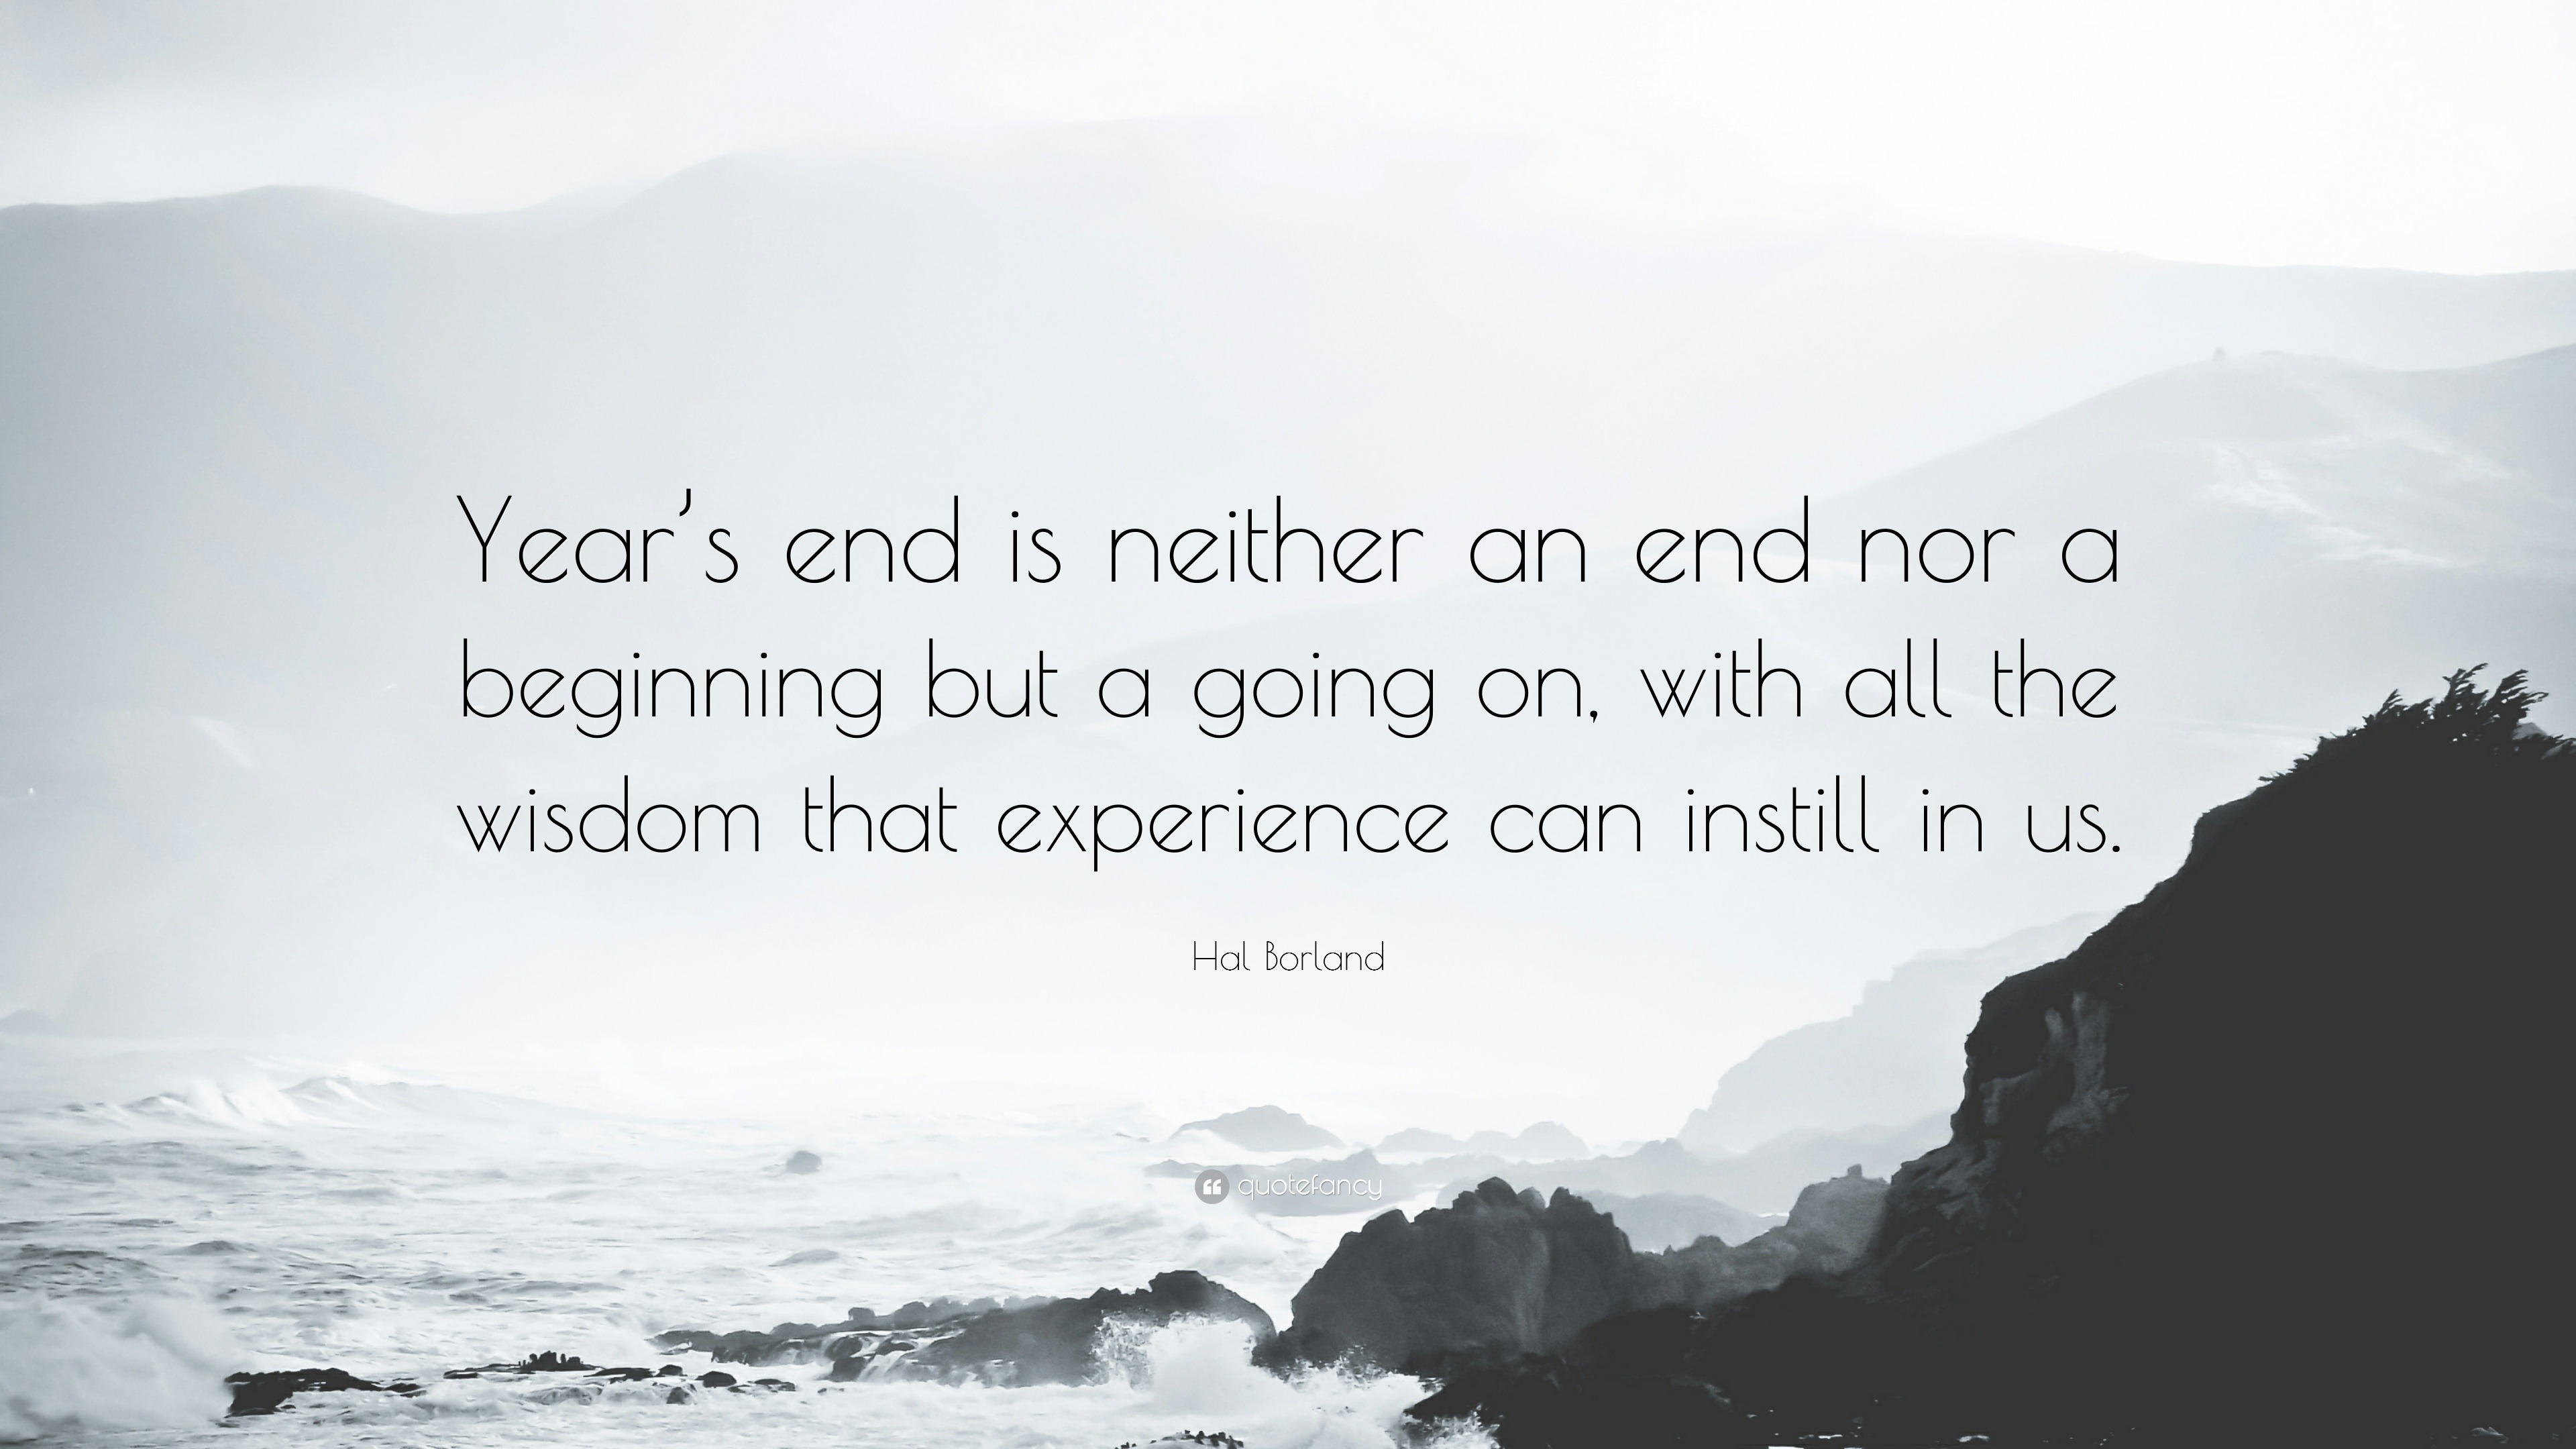 Hal Borland Quote: “Year's end is neither an end nor a beginning but a going on,